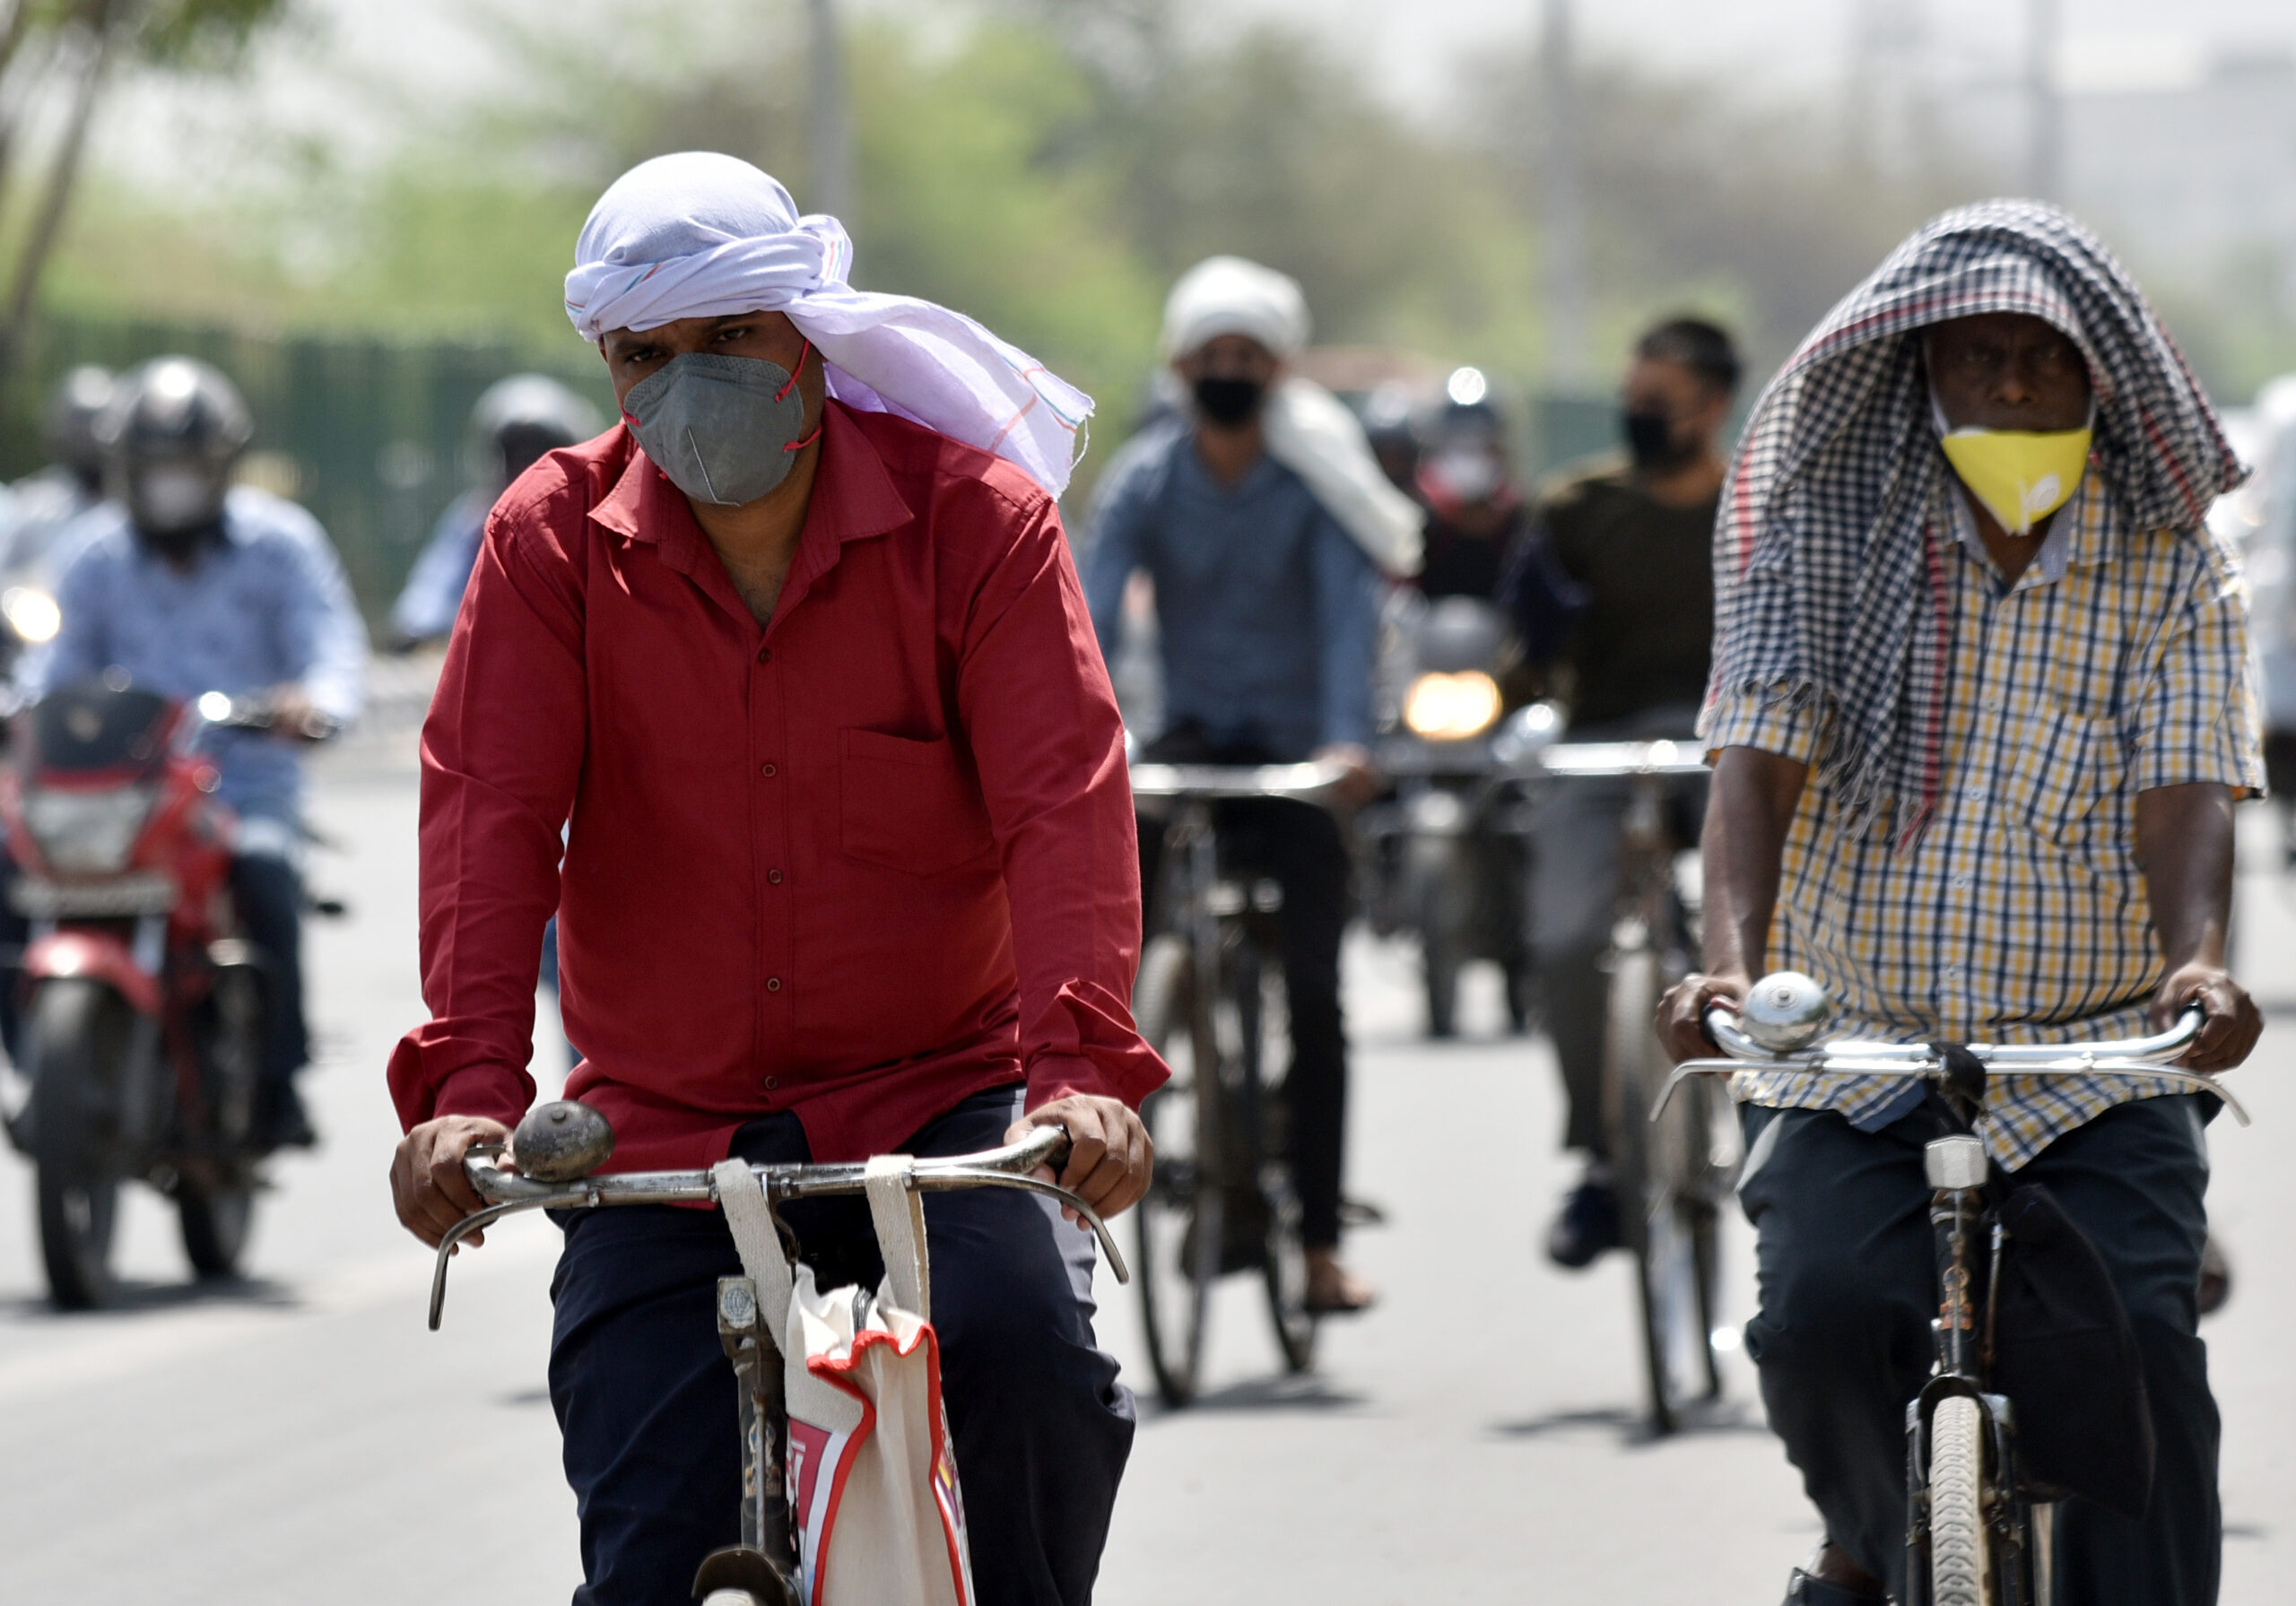 IMD : Odisha will experience severe heatwave conditions till June 19